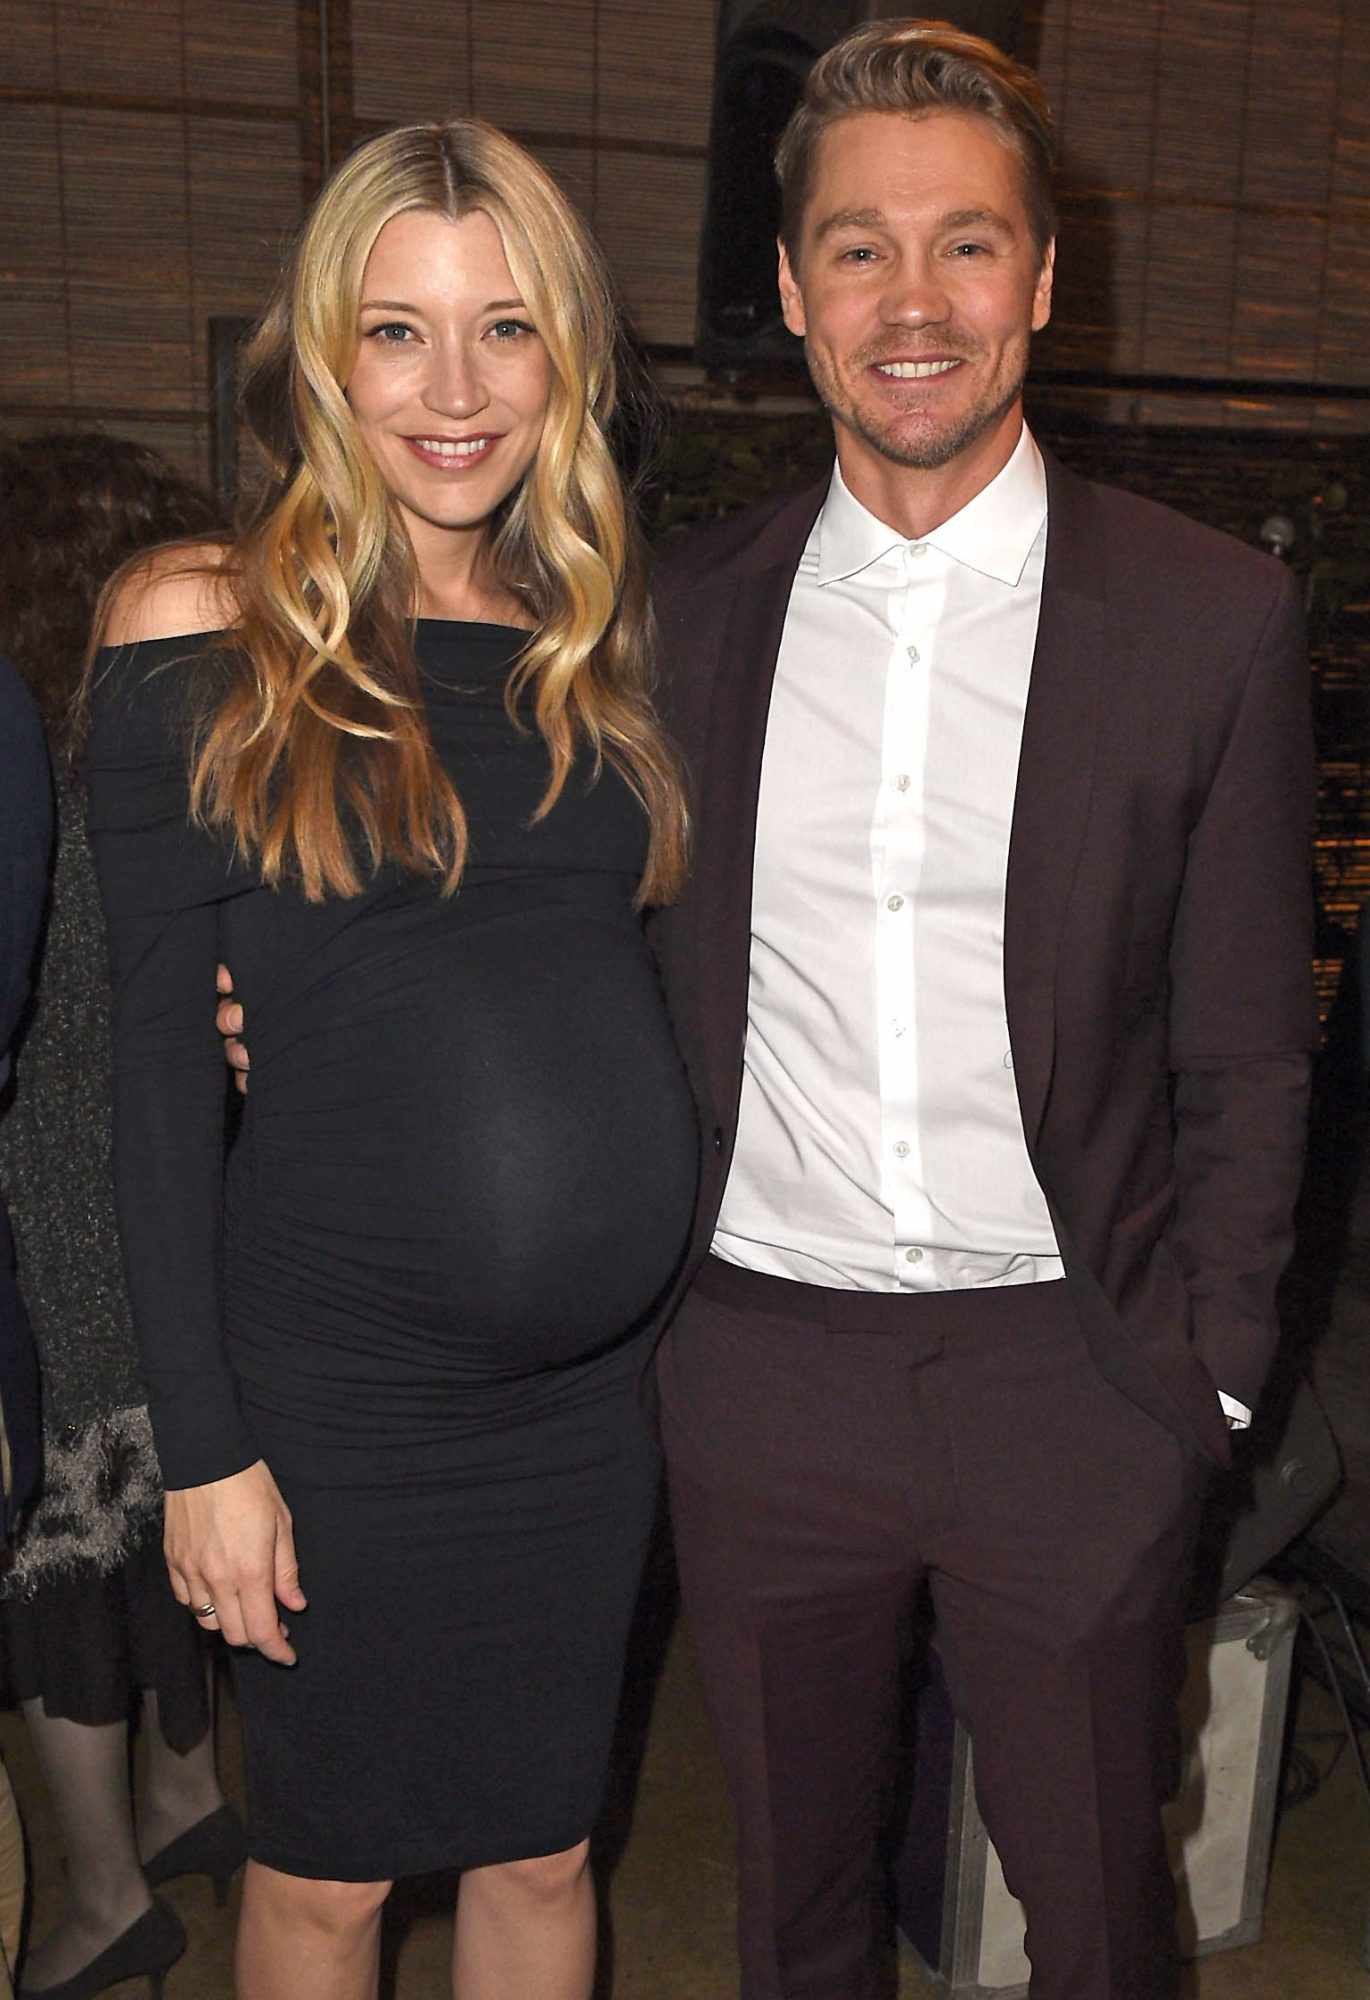 Pregnant Sarah with her husband Chad Murry